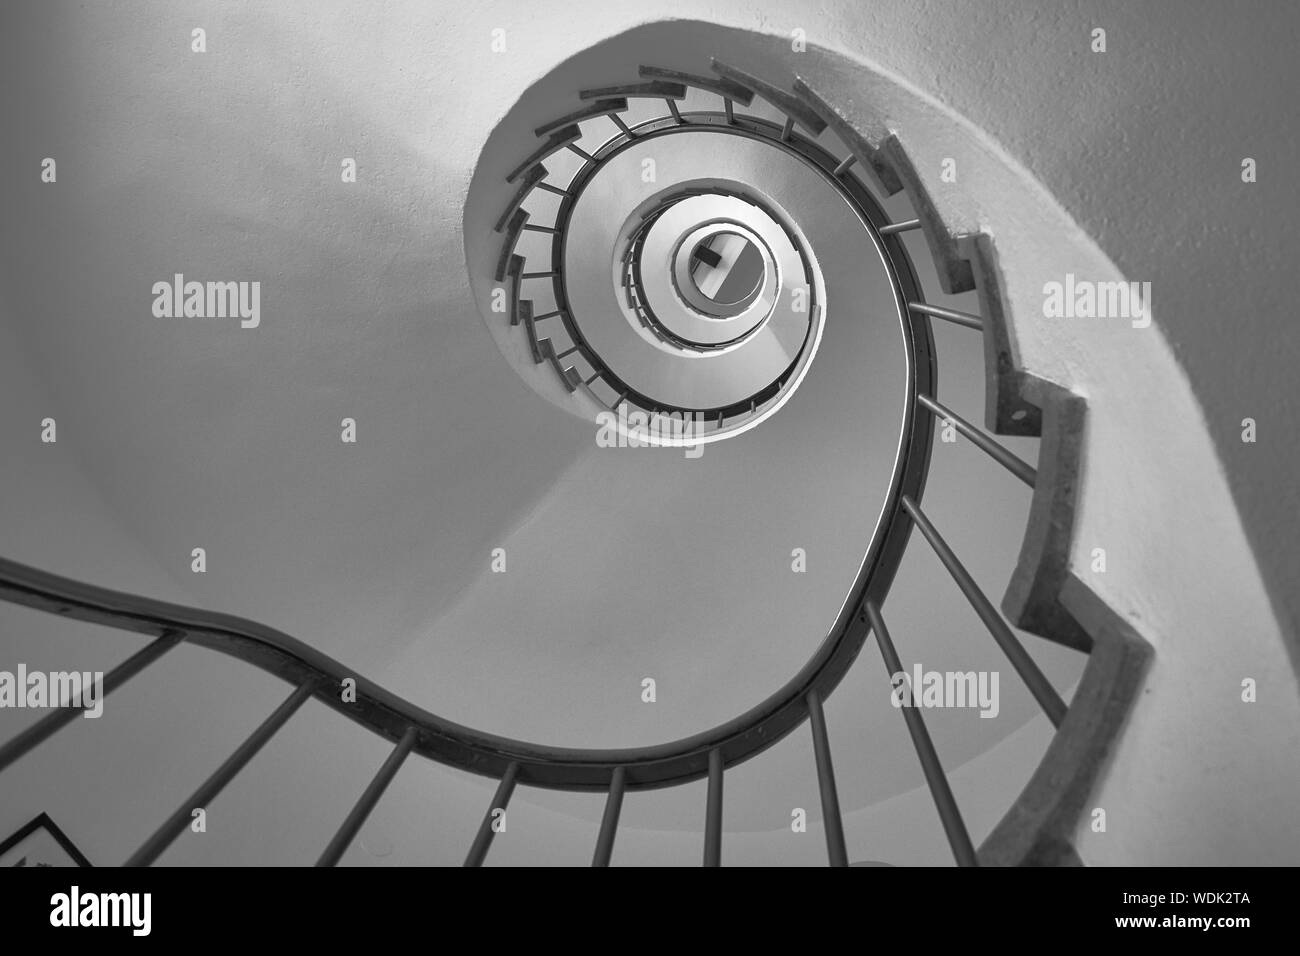 Spiral staircase in black and white from below Stock Photo